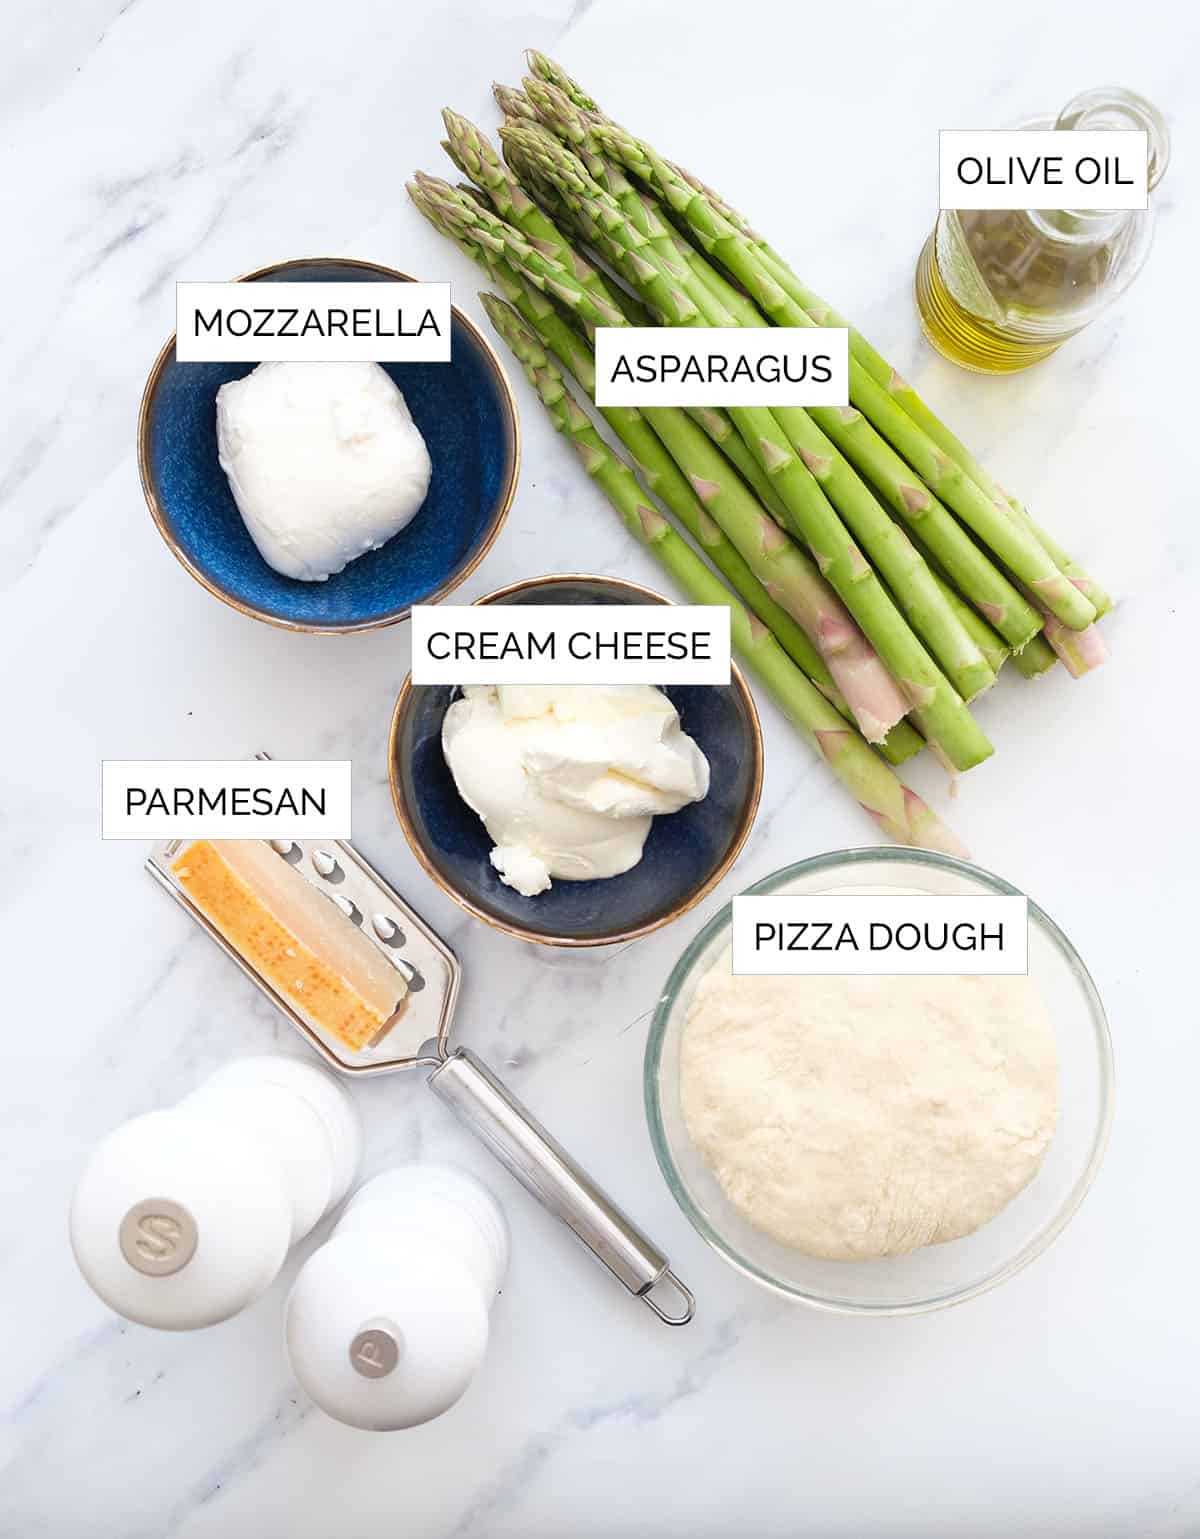 Top view of the ingredients to make this asparagus pizza.